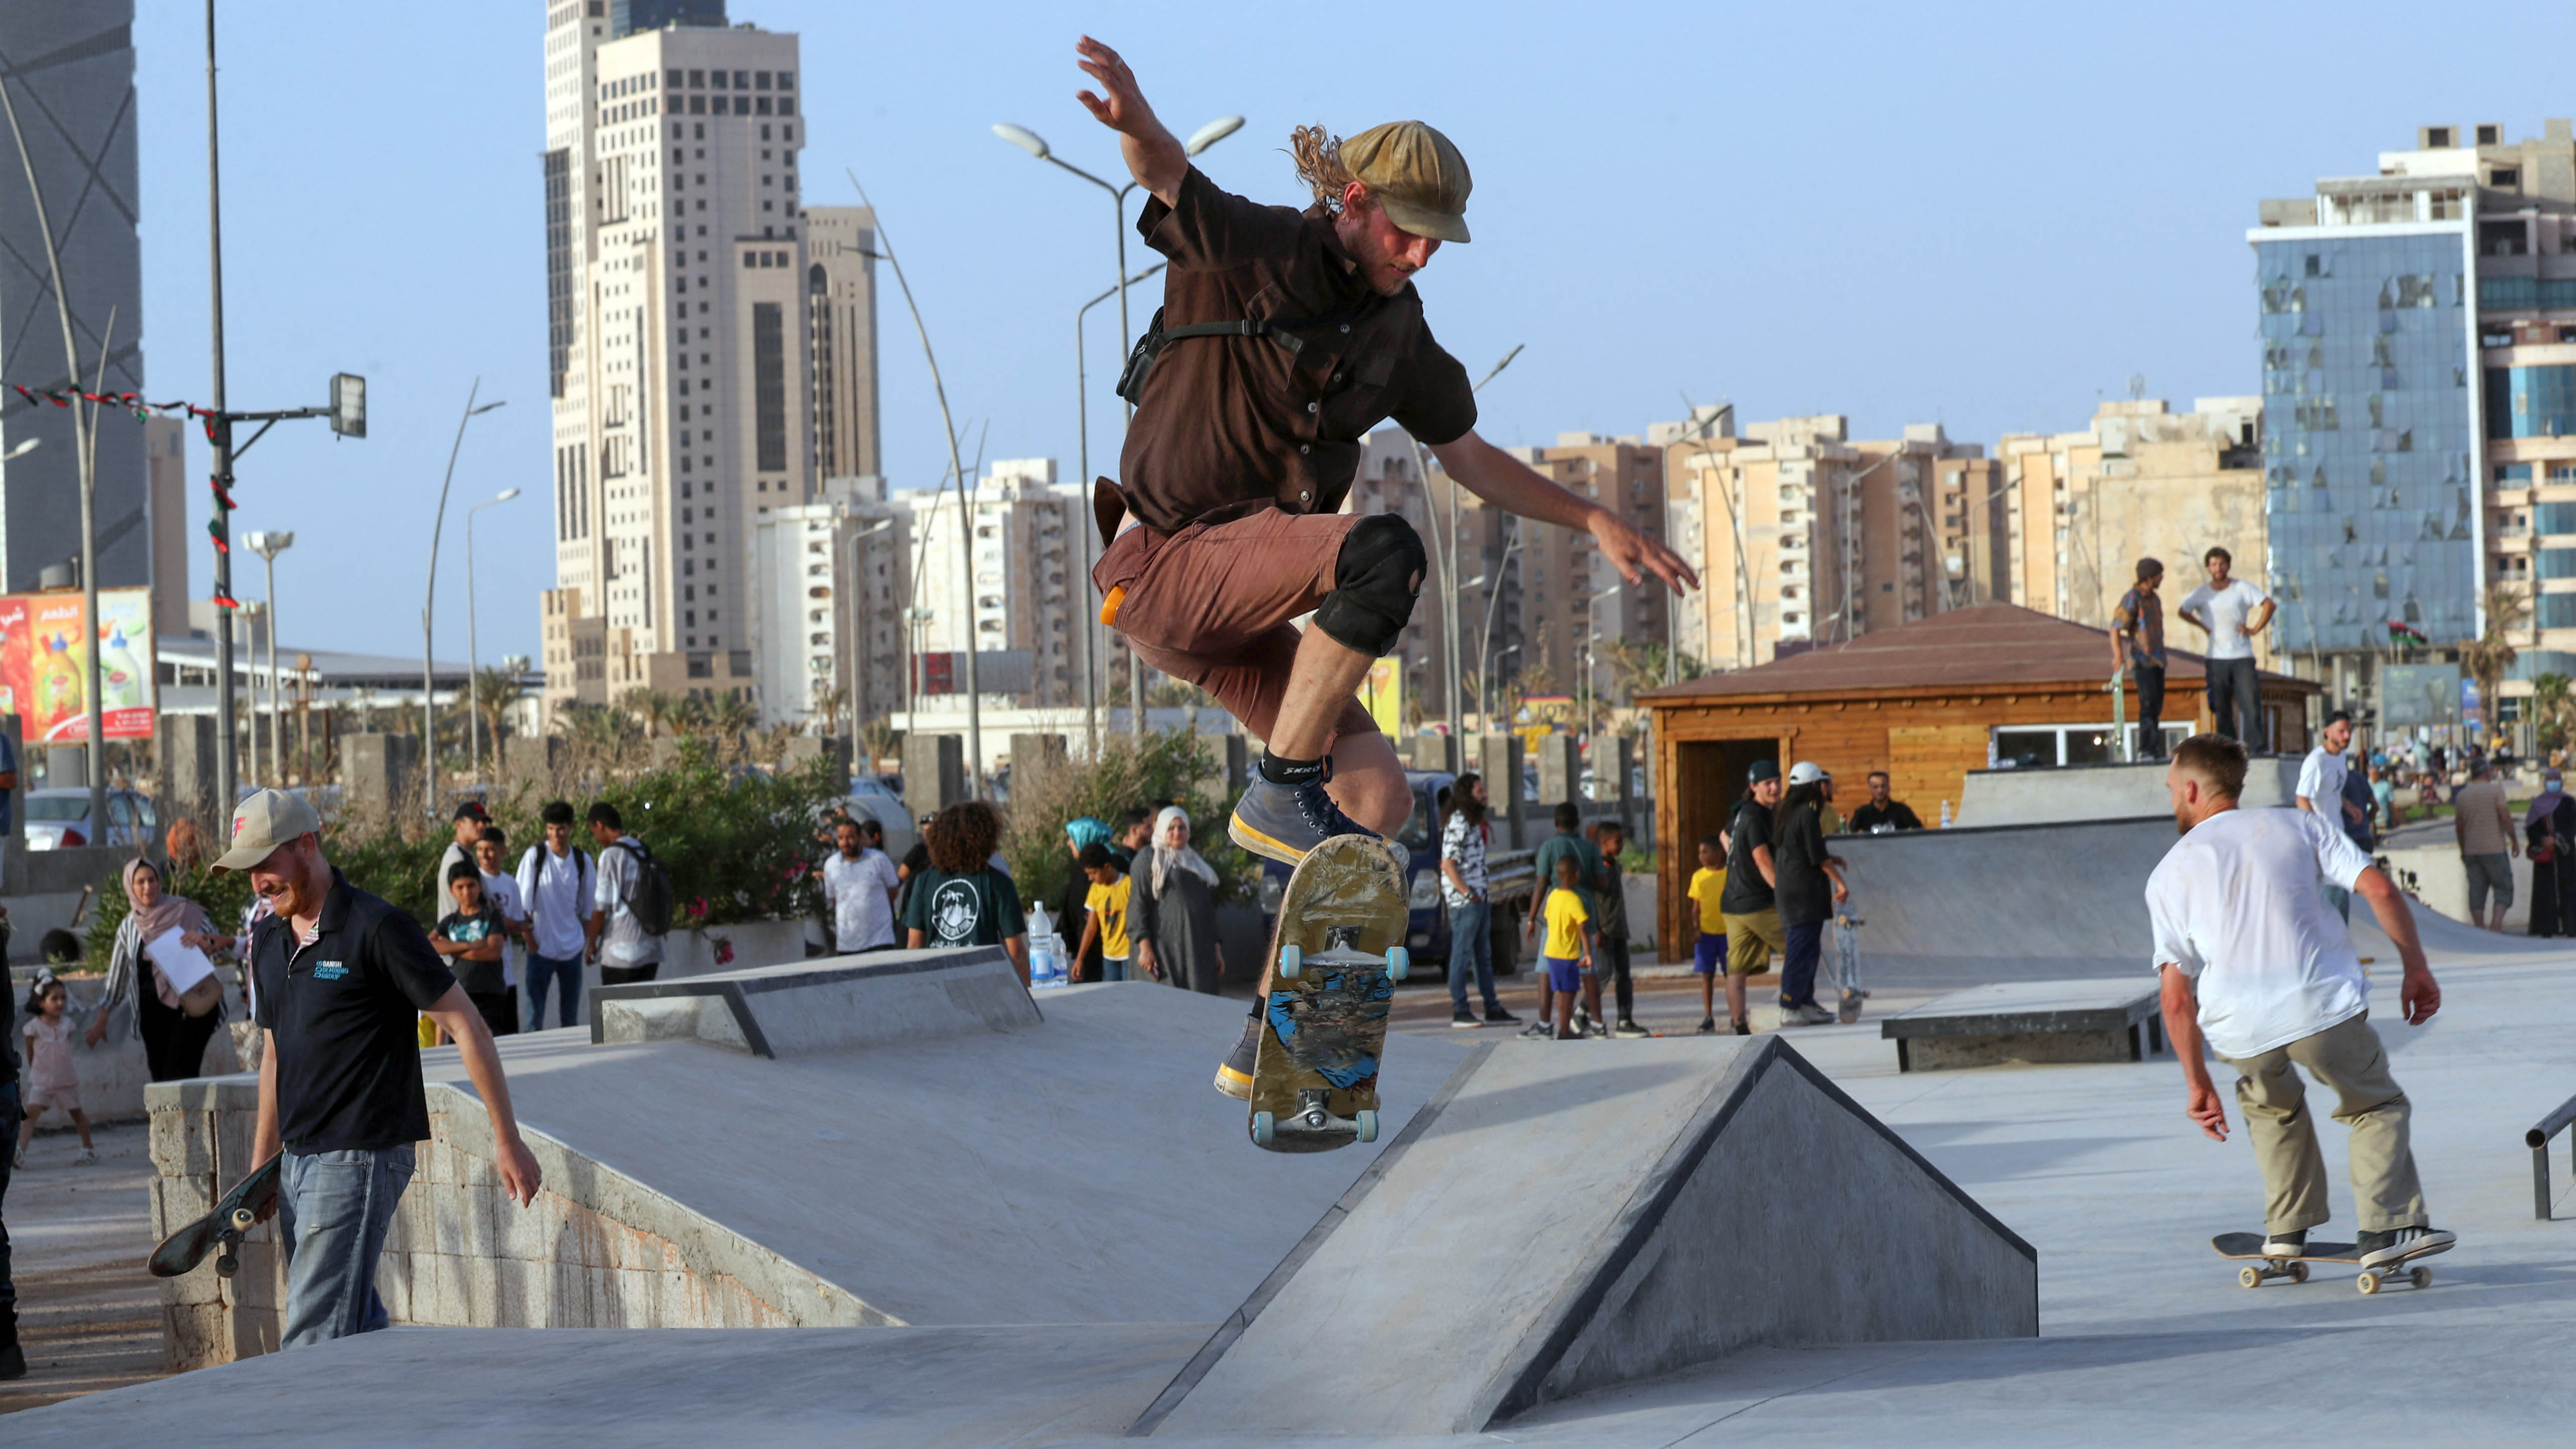 For young Libyan skateboarders, interest in the sport reflects a yearning for normality, to be like other nations and other young people (photo: Mahmud Turkia/AFP) 